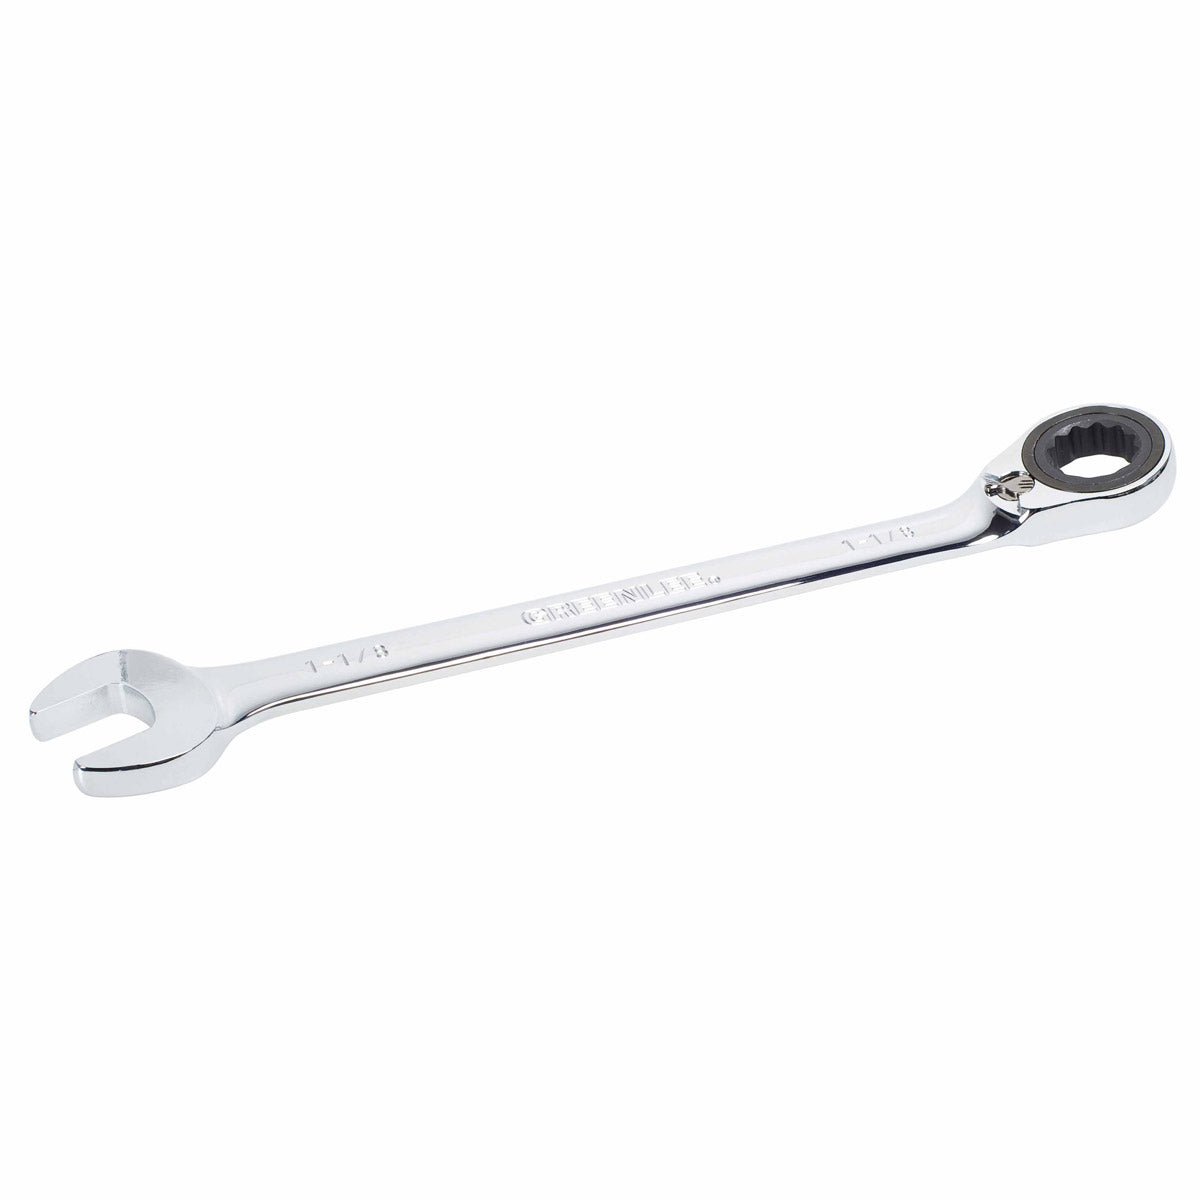 Greenlee 0354-25 1-1/8" Combination Ratcheting Wrench